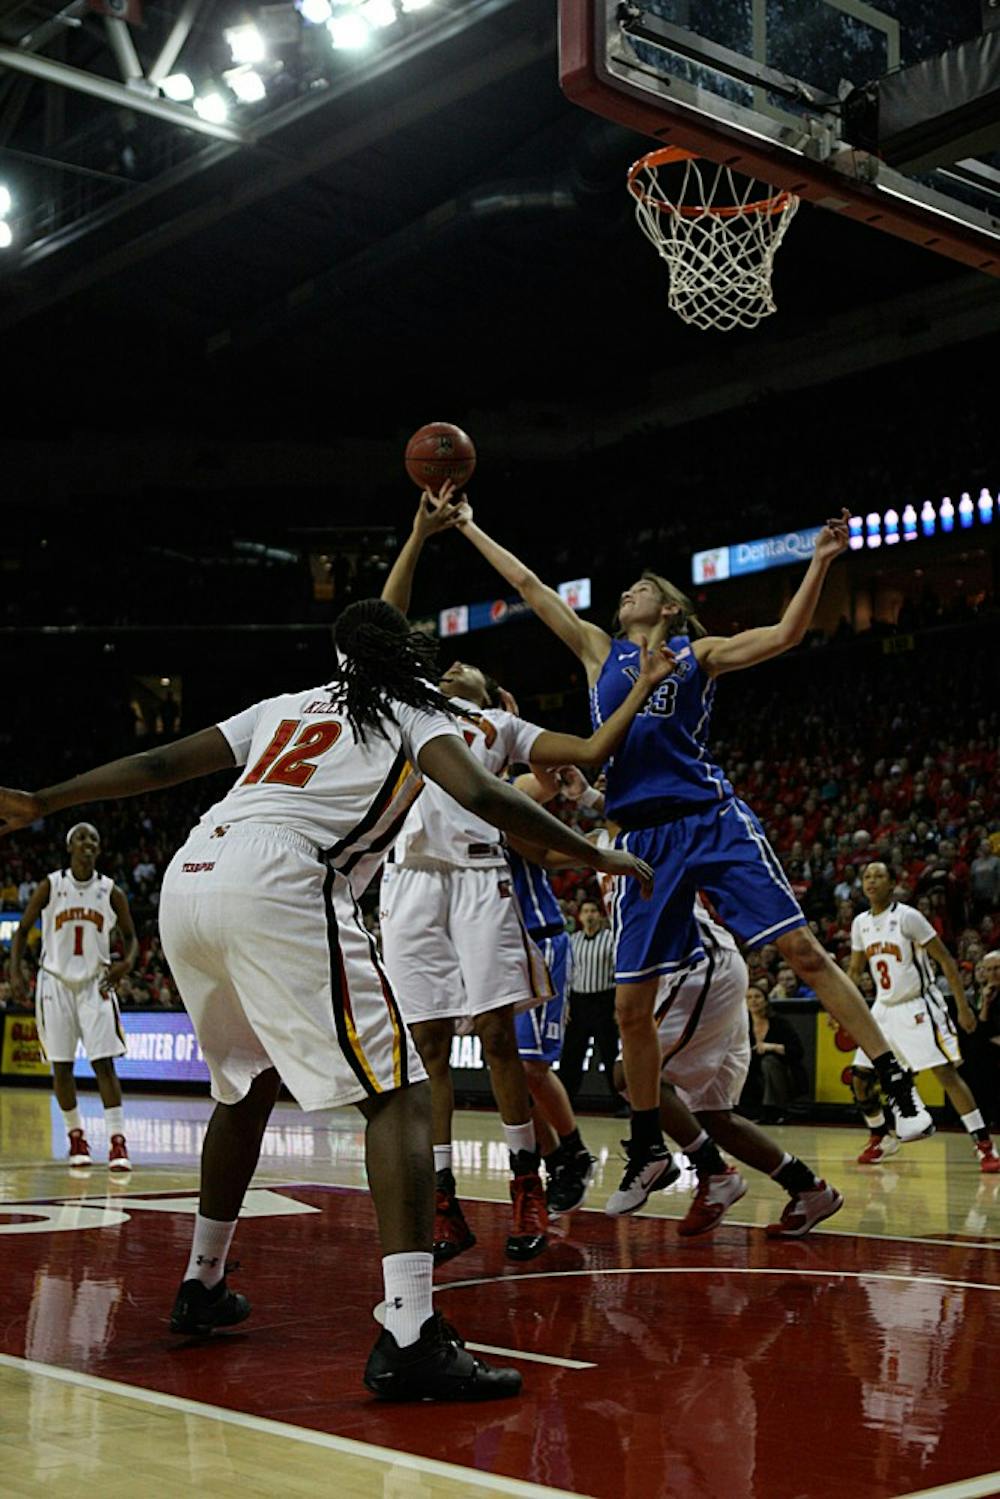 The Blue Devils were outrebounded by the Terrapins 23-16 on the offensive glass and 45-36 overall.